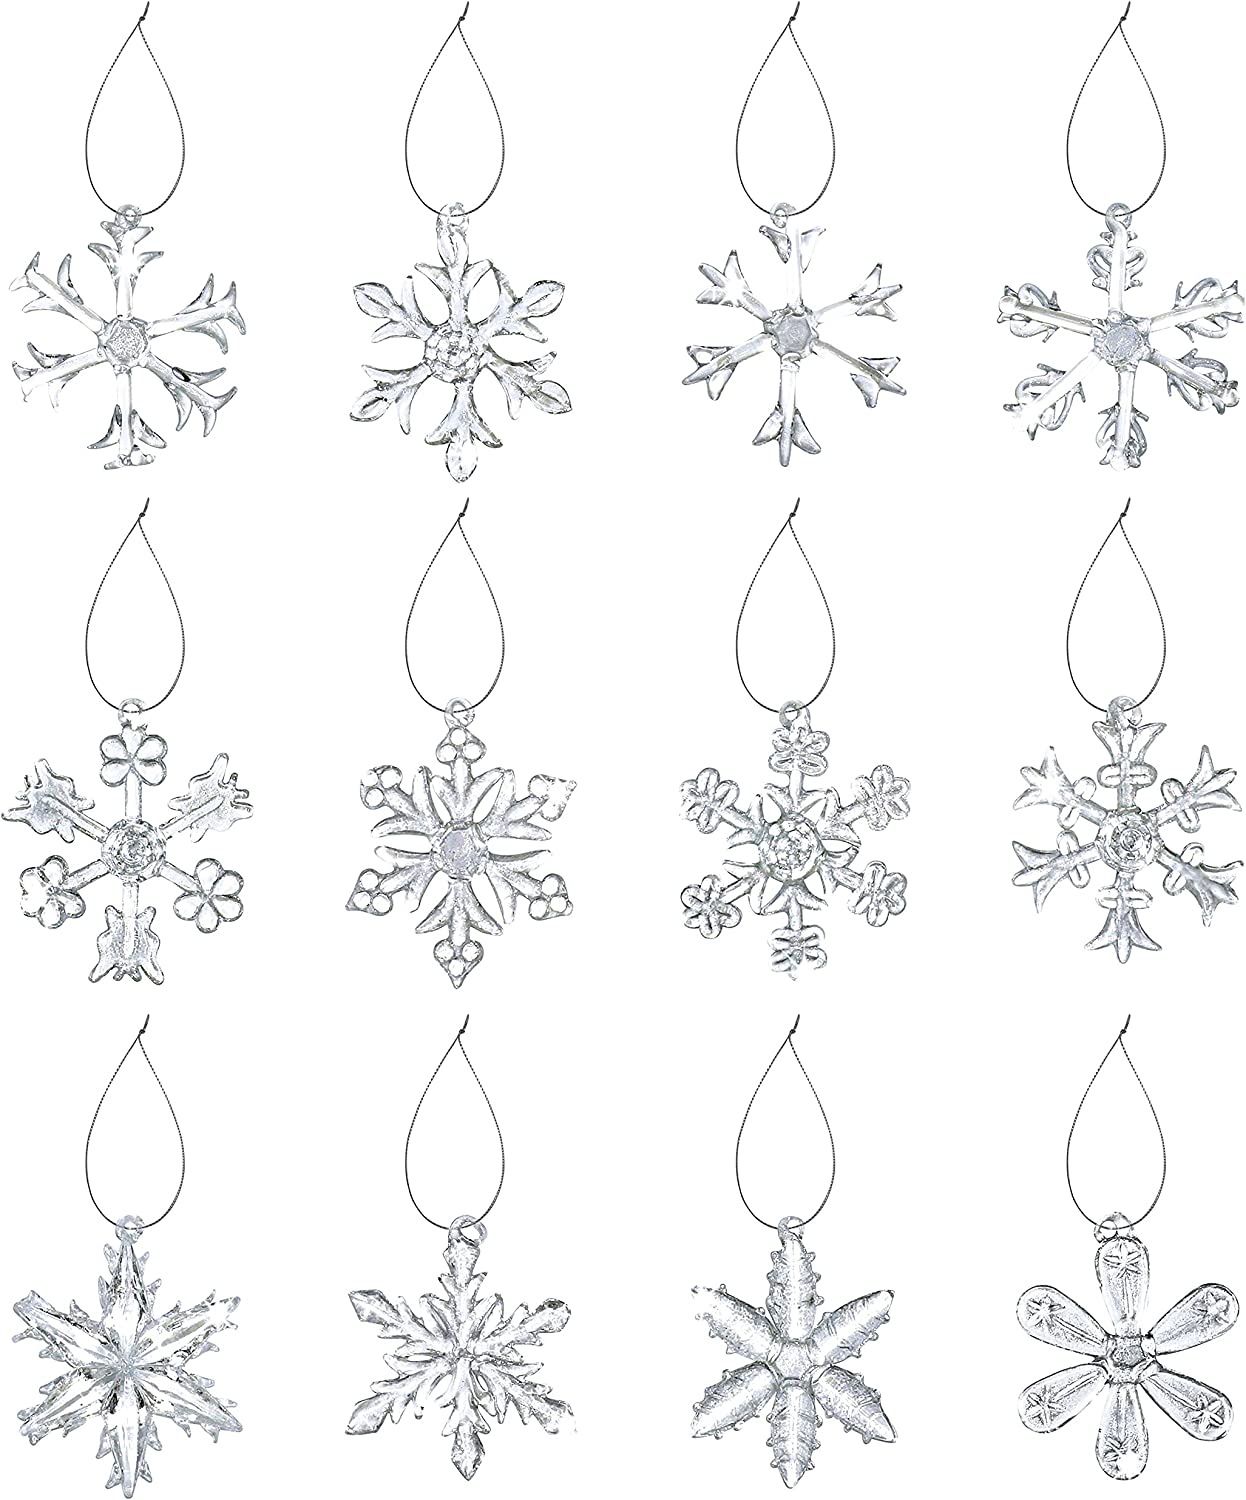 Glass Snowflakes Ornaments 12 Pcs - Clear Glass Christmas Ornaments 2.5" Hanging Snowflake Ornaments for Christmas Tree Winter Wonderland Decoration by 4E's Novelty